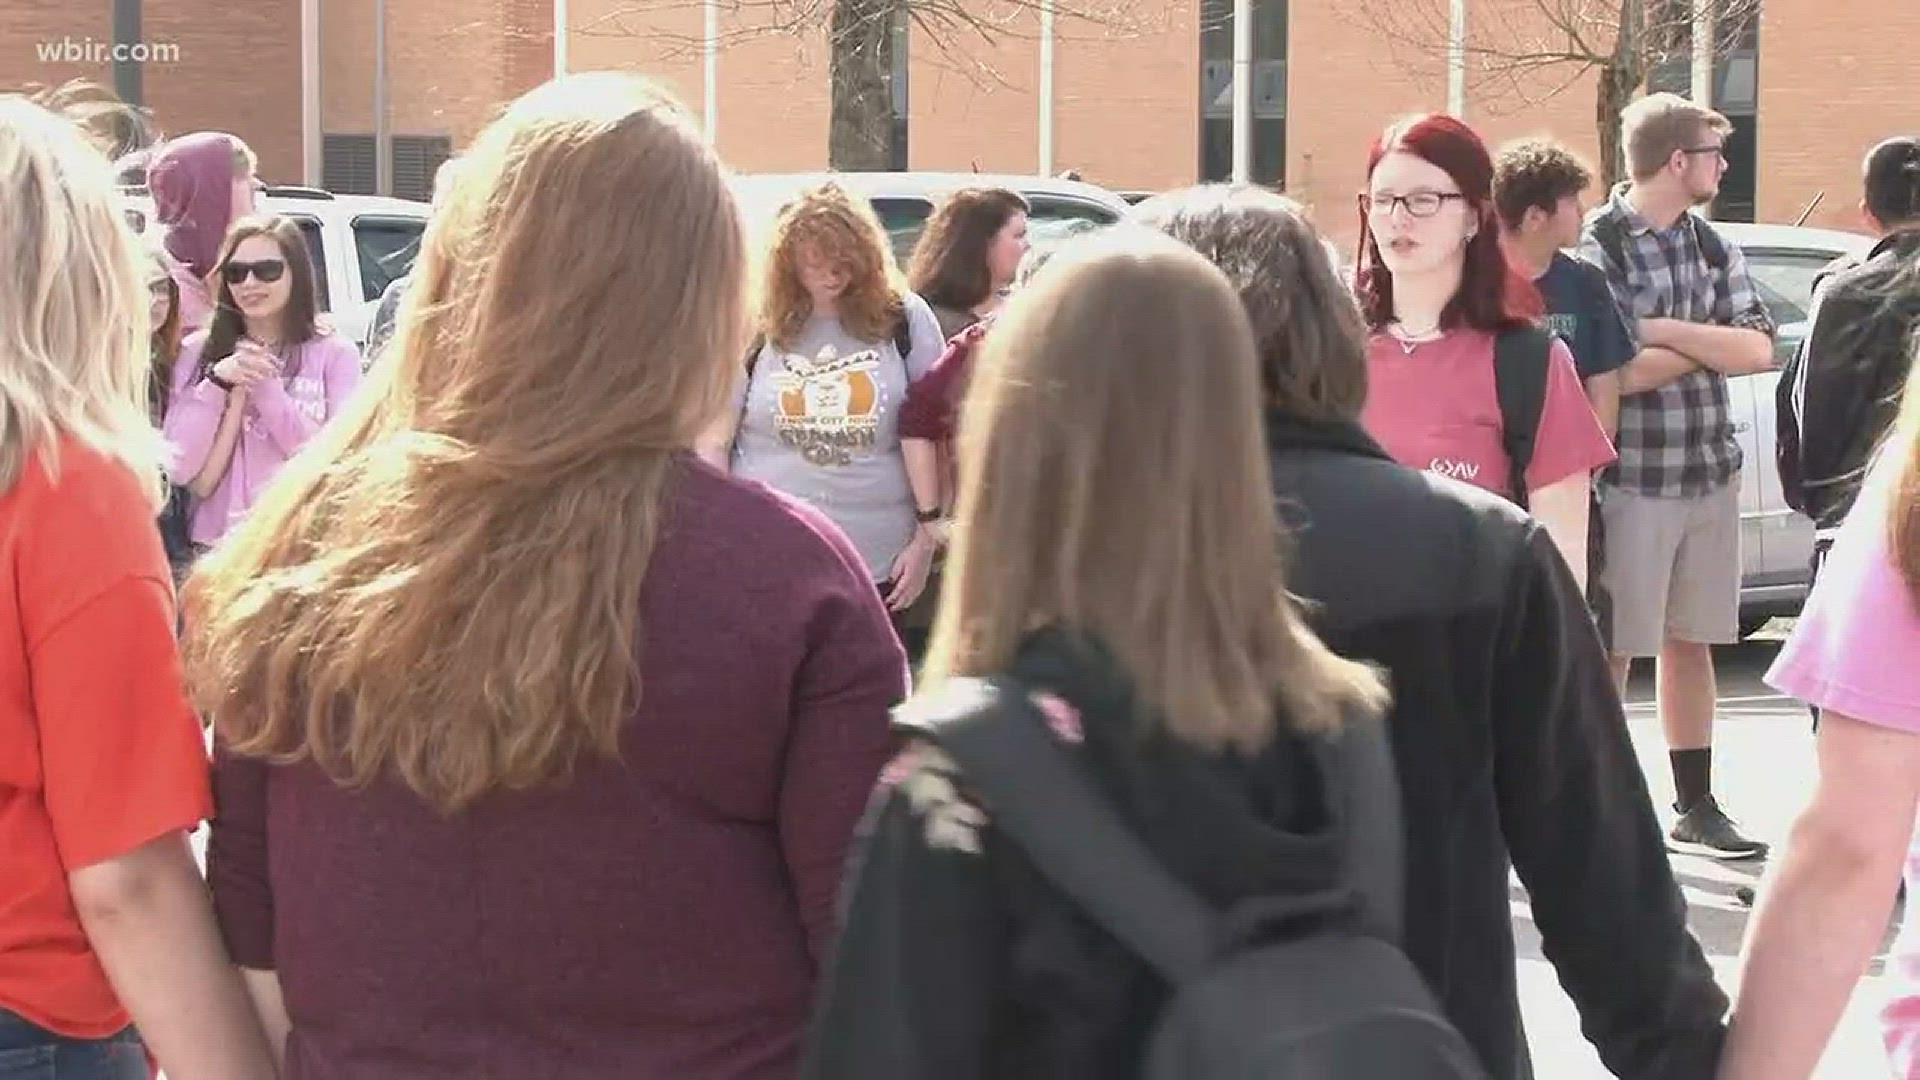 Dozens of students at Lenoir City High School honored the victims of Florida school shootings, talked about school security, and how to make a change.